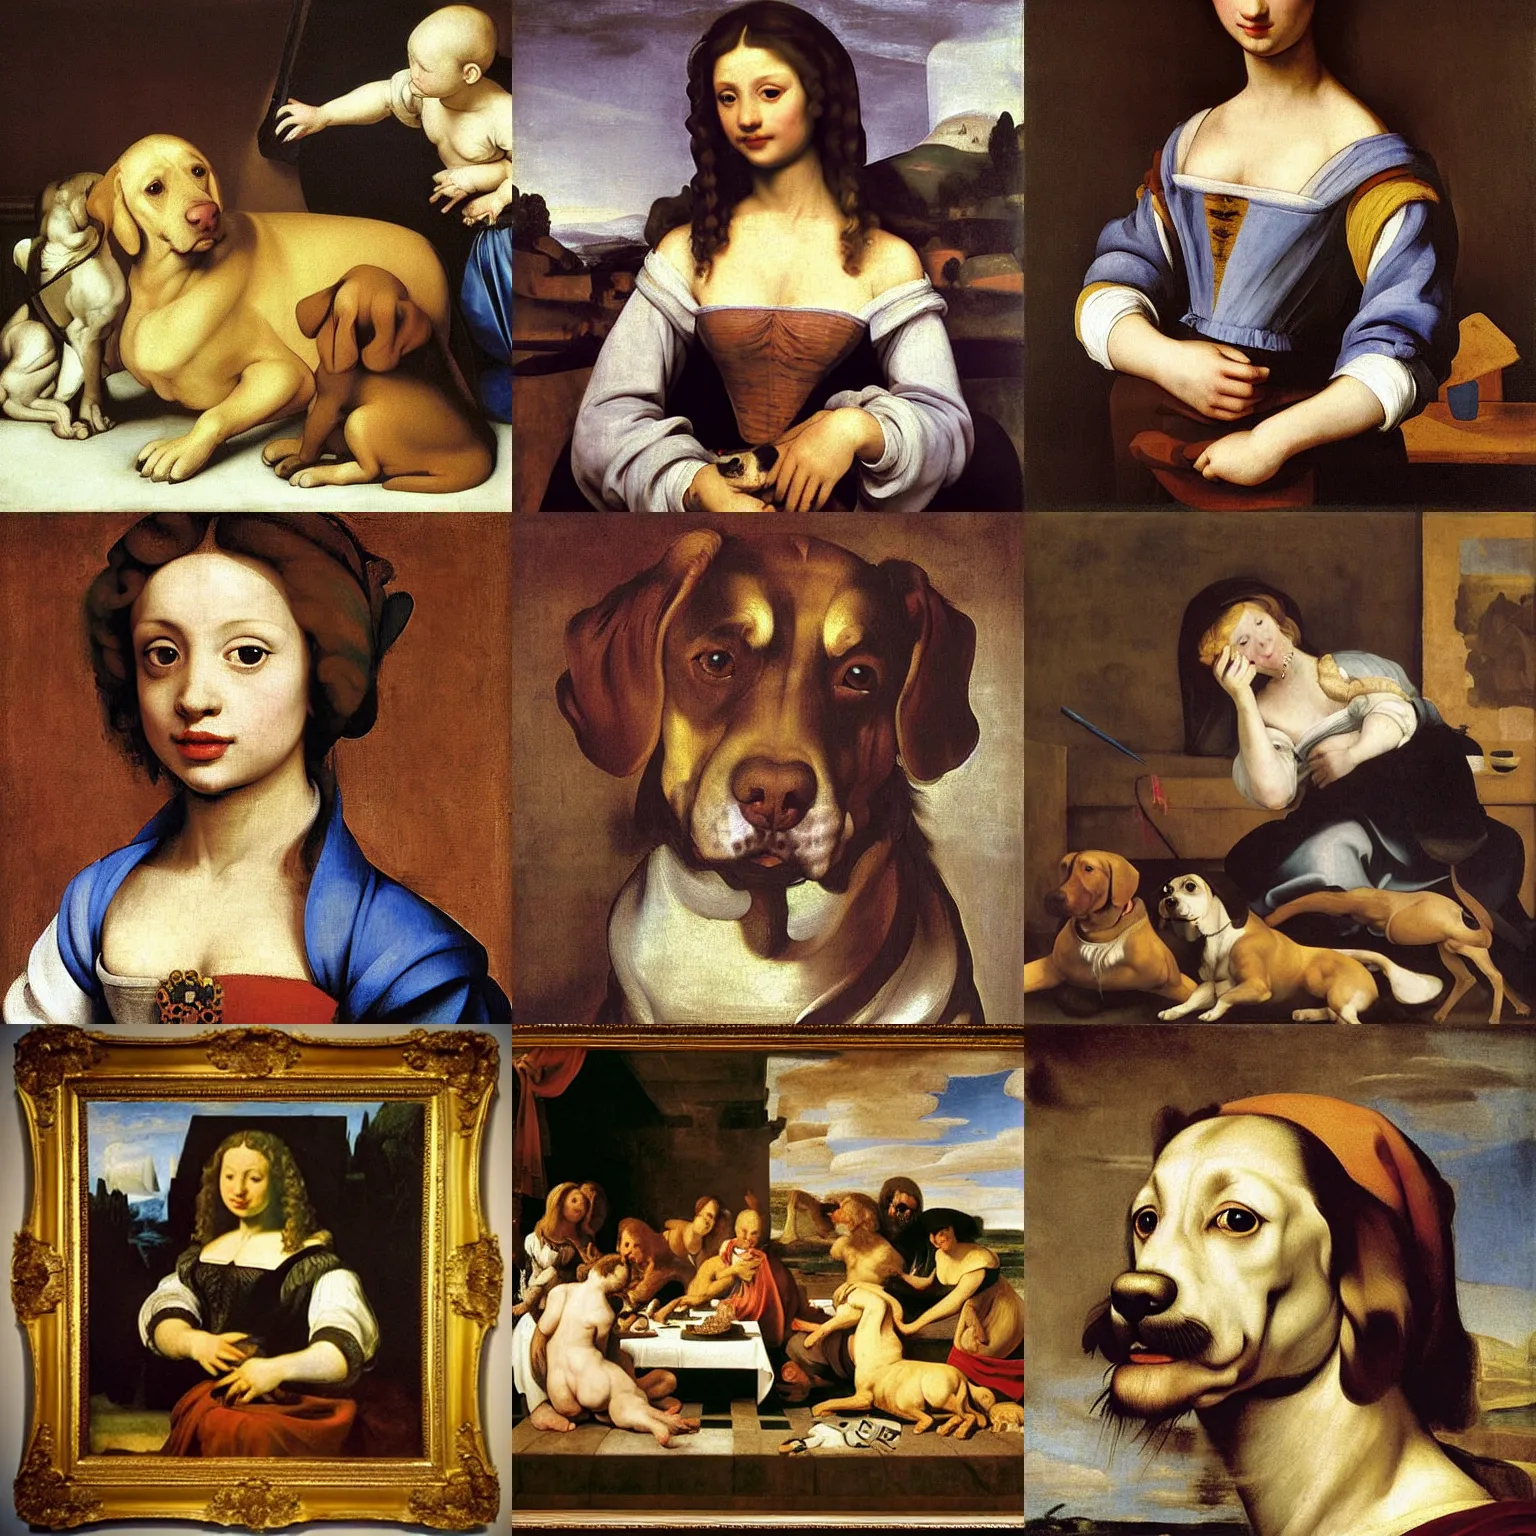 Prompt: masterpiece oil on canvas painting of a dog dog dog dog dog dog dog dog dog dog dog dog dog dog dog dog dog dog dog dog dog dog dog dog animal by Pablo Picasso by Banksy Leonardo da Vinci by Michelangelo by Raphael by Caravaggio by Peter Paul Rubens by Artemisia Gentileschi by Gian Lorenzo Bernini by Rembrandt by Jan Vermeer by Katsushika Hokusai by Utagawa Hiroshige by Eugène Delacroix by Édouard Manet by Edgar Degas by Paul Cézanne by Claude Monet by Mary Cassatt by Paul Gauguin by Vincent van Gogh by Gustav Klimt by Henri Matisse by Amadeo Modigliani by Diego Rivera by Georgia O’Keeffe by René Magritte by Salvador Dalí by Frida Kahlo by Jackson Pollock by Andy Warhol by Jean-Michel Basquiat by Yayoi Kusama by Ai Weiwei by Keith Haring by Takashi Murakami